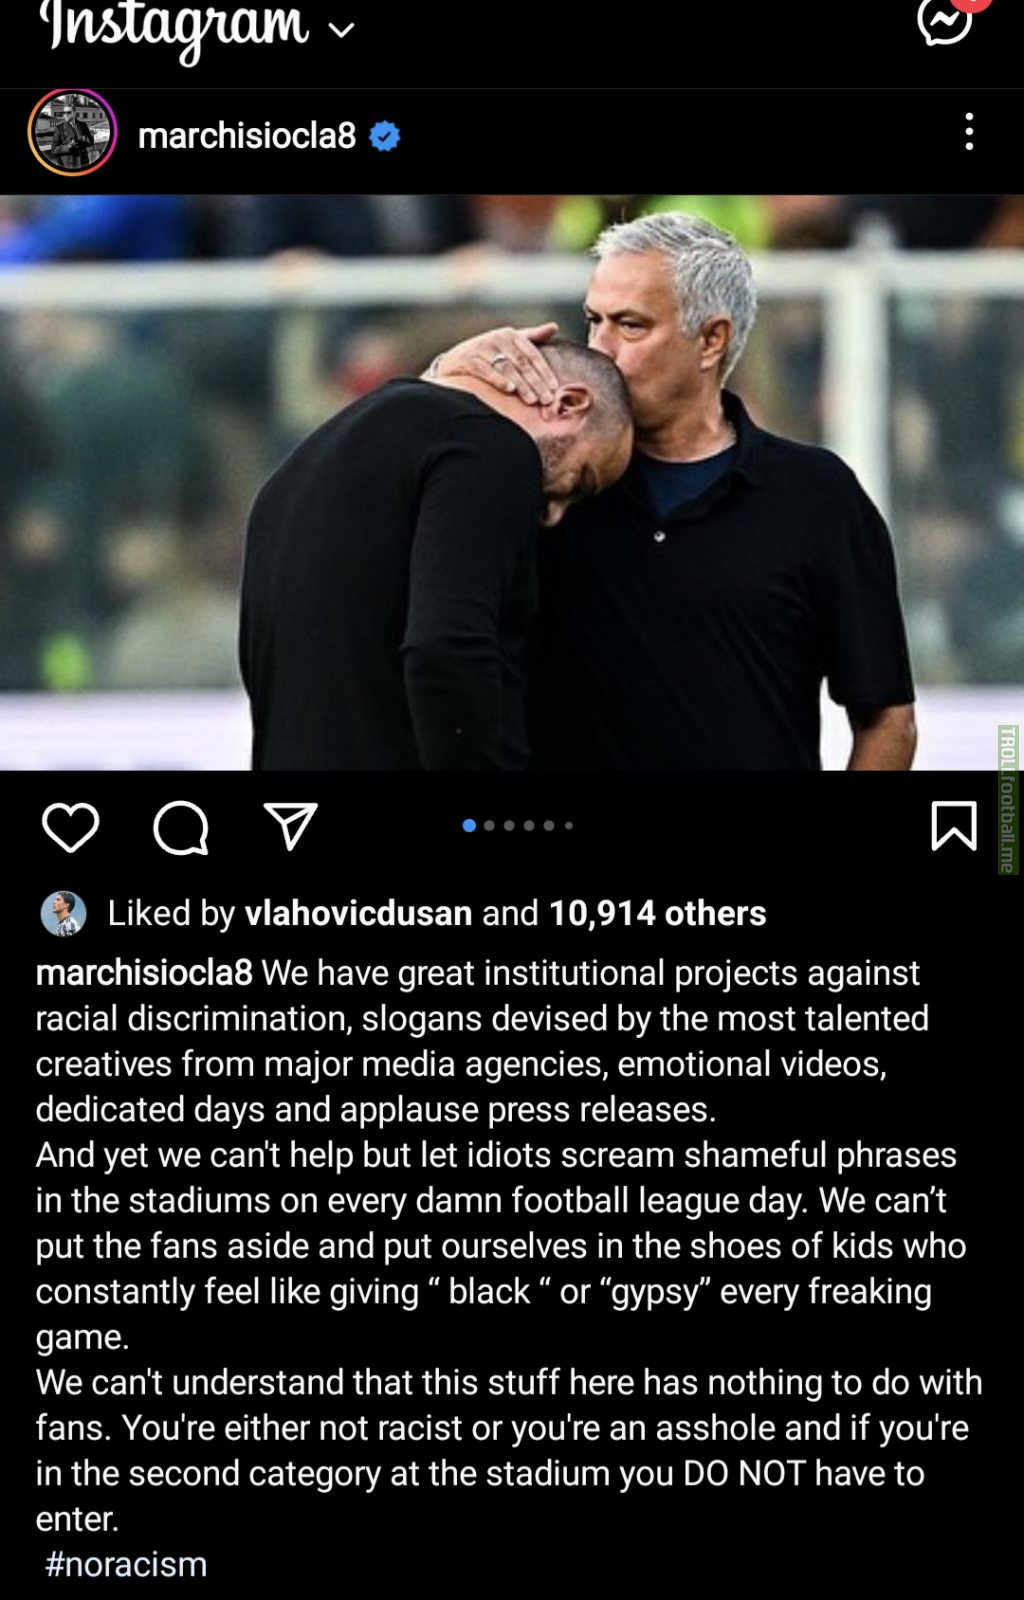 Claudio Marchisio post about Racism in Serie A